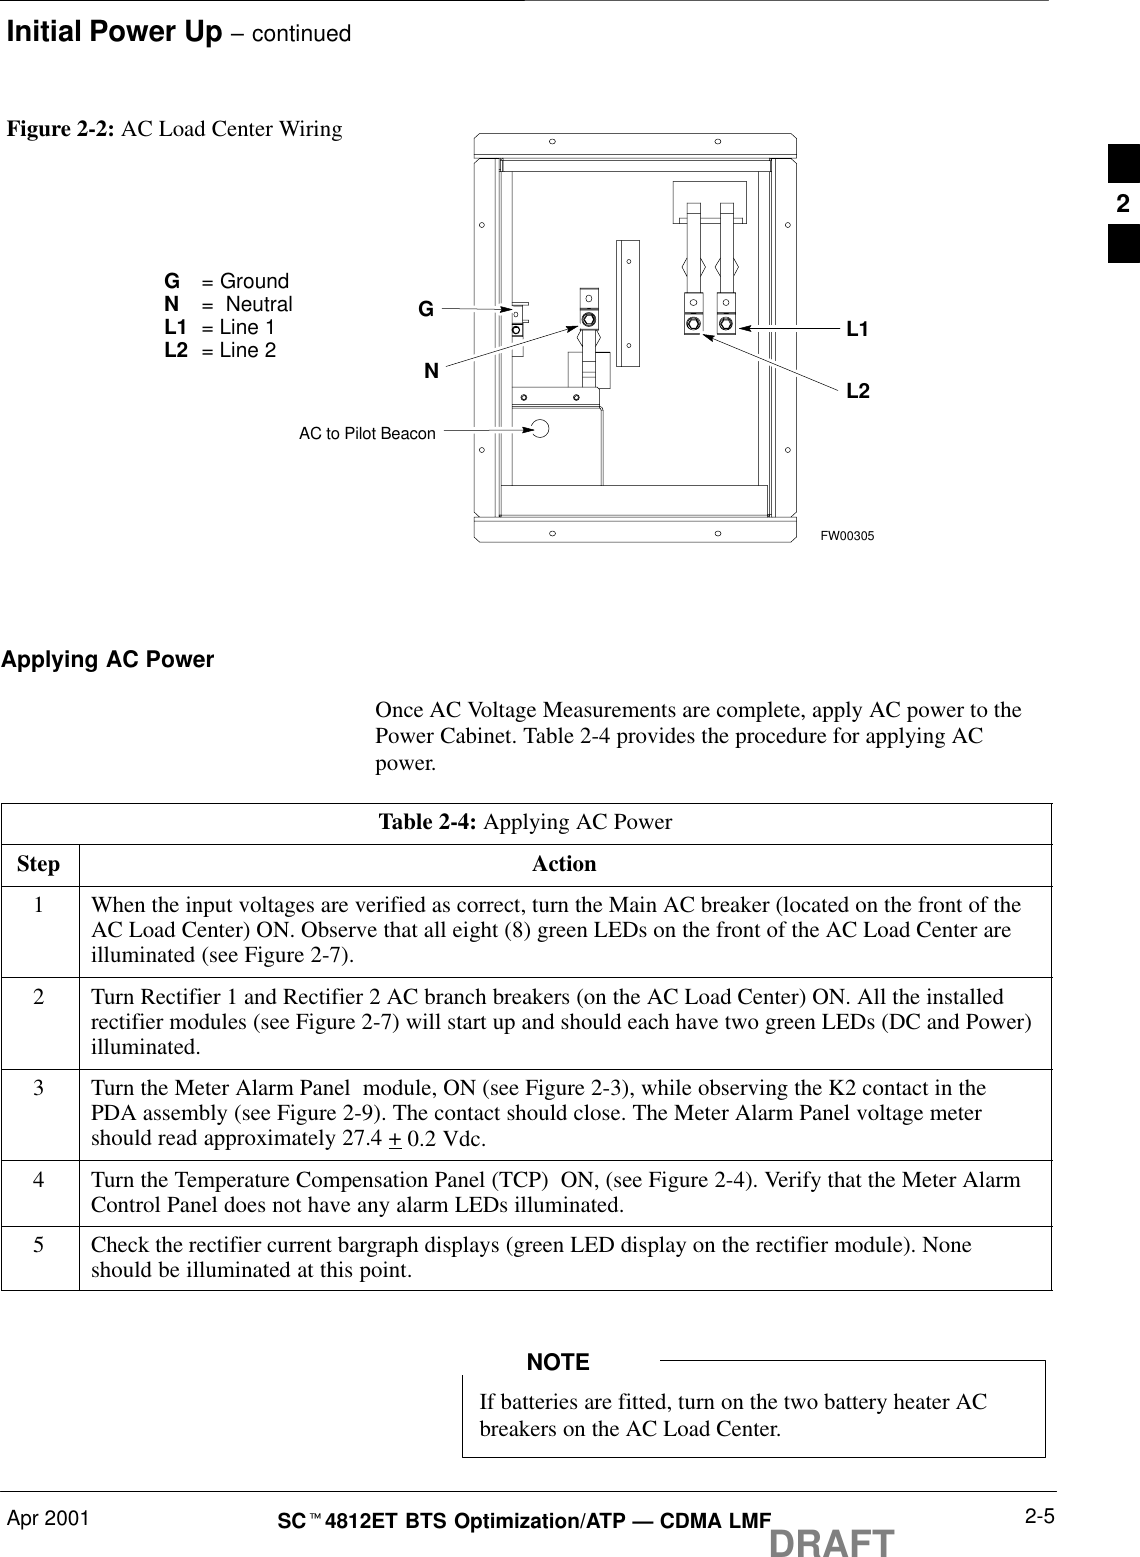 Initial Power Up – continuedApr 2001 2-5SCt4812ET BTS Optimization/ATP — CDMA LMFDRAFTFigure 2-2: AC Load Center Wiring   G= GroundN  =  NeutralL1 = Line 1L2 = Line 2GNAC to Pilot BeaconL2L1FW00305Applying AC PowerOnce AC Voltage Measurements are complete, apply AC power to thePower Cabinet. Table 2-4 provides the procedure for applying ACpower.Table 2-4: Applying AC PowerStep Action1When the input voltages are verified as correct, turn the Main AC breaker (located on the front of theAC Load Center) ON. Observe that all eight (8) green LEDs on the front of the AC Load Center areilluminated (see Figure 2-7).2Turn Rectifier 1 and Rectifier 2 AC branch breakers (on the AC Load Center) ON. All the installedrectifier modules (see Figure 2-7) will start up and should each have two green LEDs (DC and Power)illuminated.3Turn the Meter Alarm Panel  module, ON (see Figure 2-3), while observing the K2 contact in thePDA assembly (see Figure 2-9). The contact should close. The Meter Alarm Panel voltage metershould read approximately 27.4 + 0.2 Vdc.4Turn the Temperature Compensation Panel (TCP)  ON, (see Figure 2-4). Verify that the Meter AlarmControl Panel does not have any alarm LEDs illuminated.5Check the rectifier current bargraph displays (green LED display on the rectifier module). Noneshould be illuminated at this point.If batteries are fitted, turn on the two battery heater ACbreakers on the AC Load Center.NOTE2